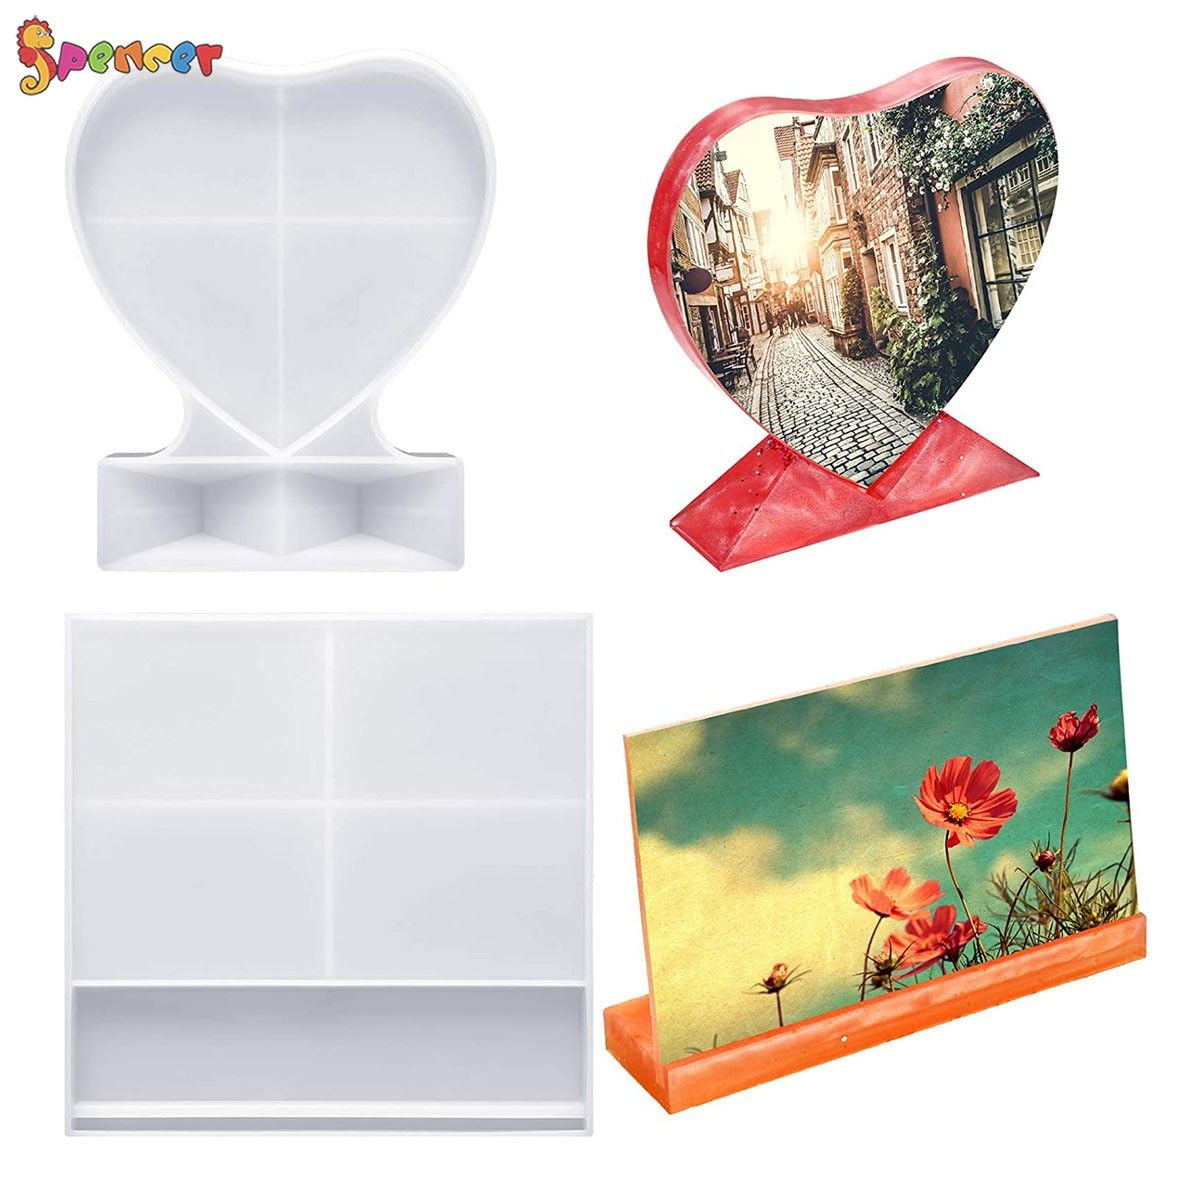 Yookat 2 Pieces Photo Frame Resin Molds Silicone Heart Molds for Resin  Heart Resin Molds Silicone Resin Mold Picture Frames for DIY Crafts Home  Decor